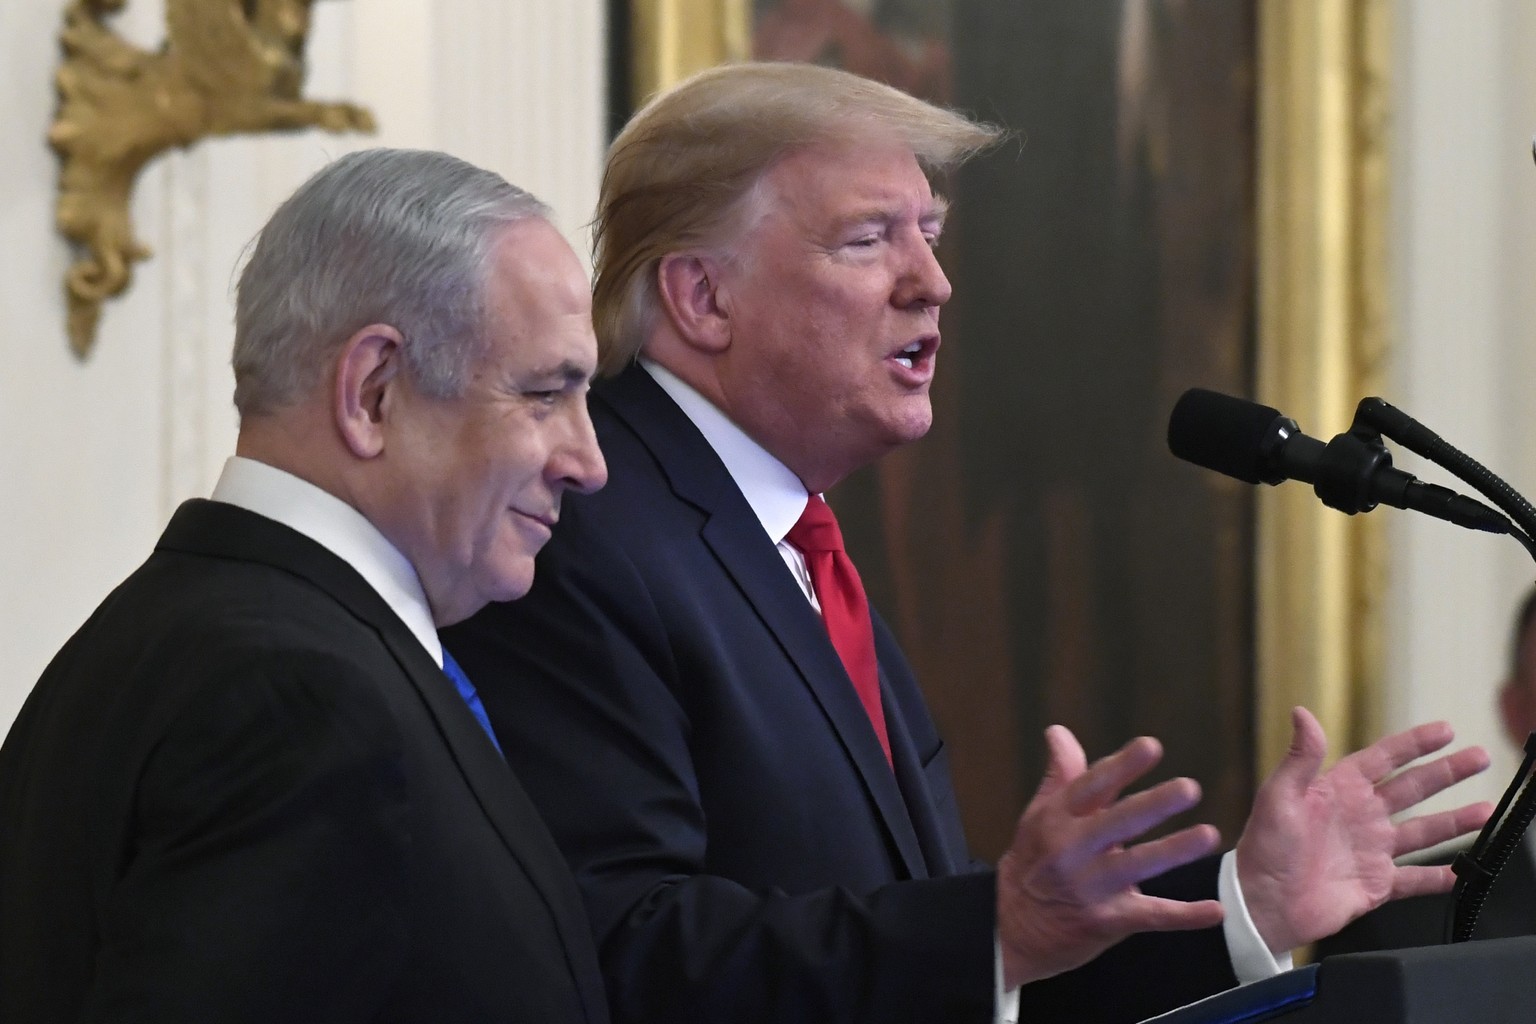 President Donald Trump, right, speaks during an event with Israeli Prime Minister Benjamin Netanyahu, left, in the East Room of the White House in Washington, Tuesday, Jan. 28, 2020, to announce the T ...